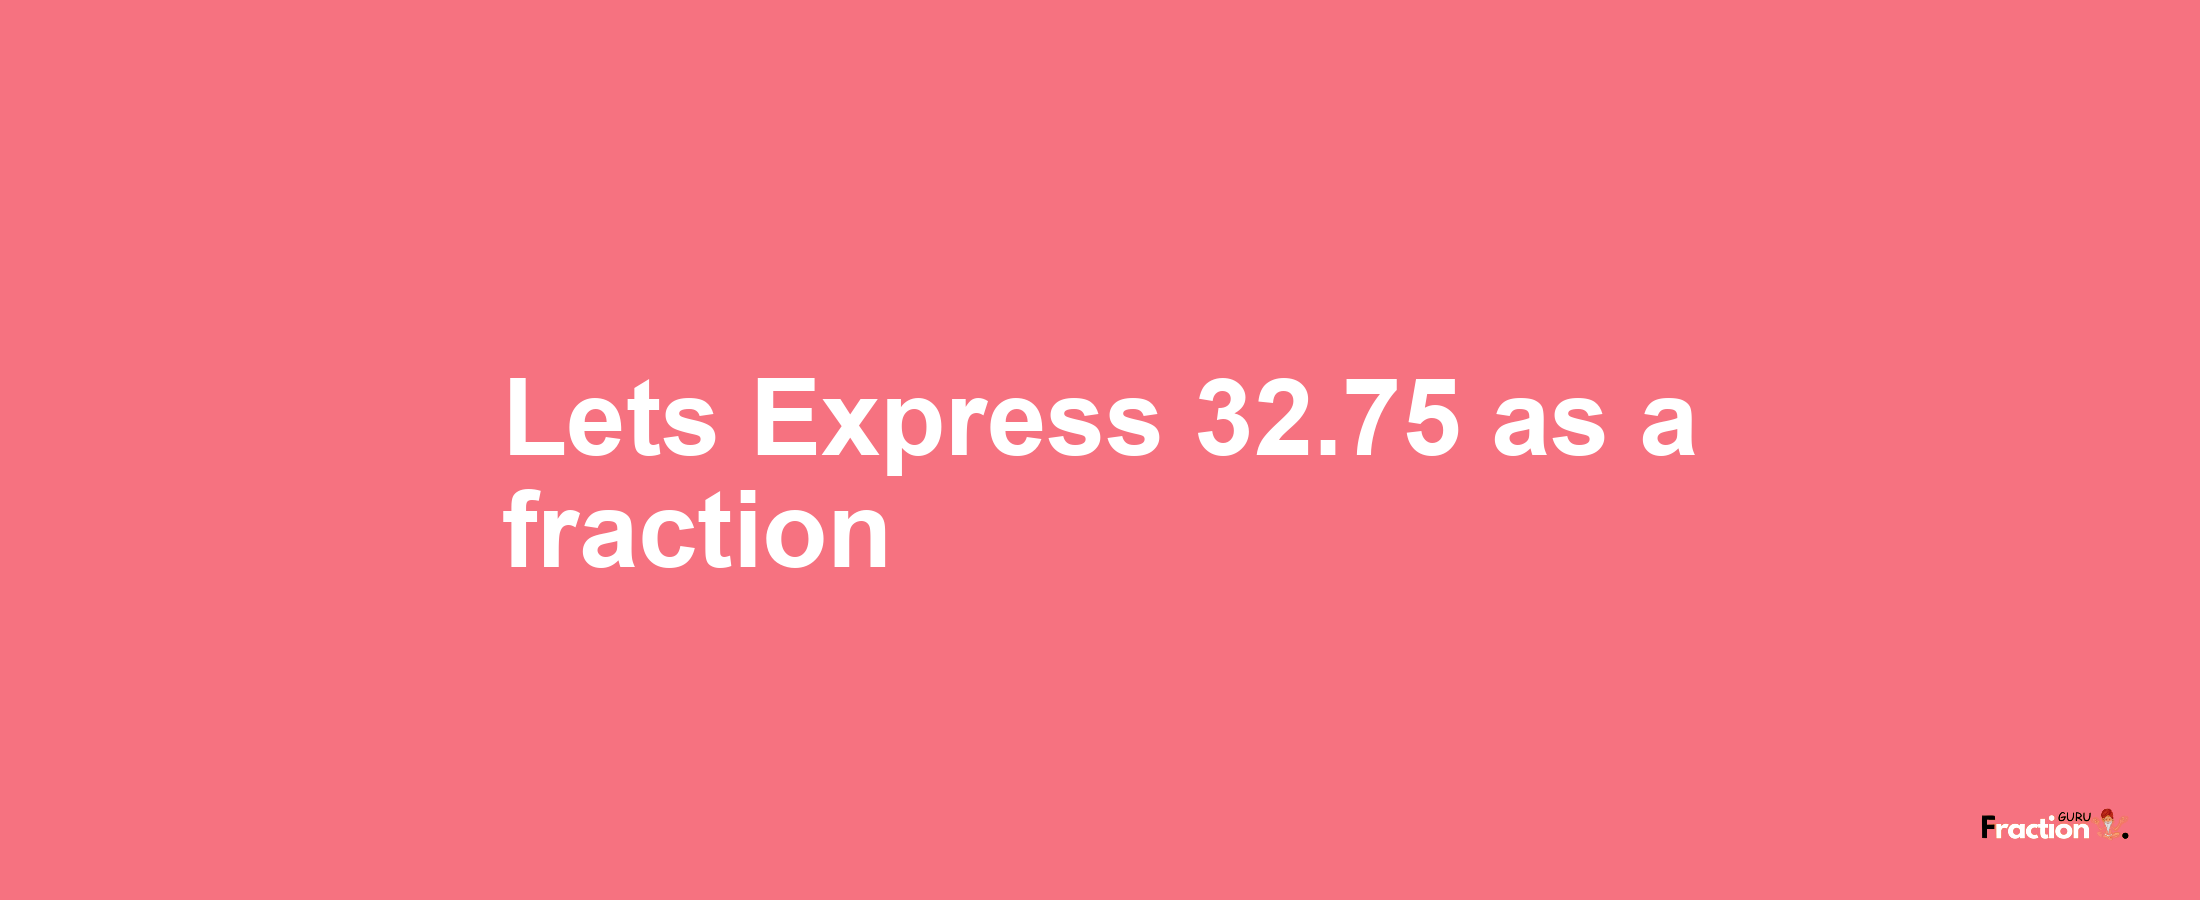 Lets Express 32.75 as afraction